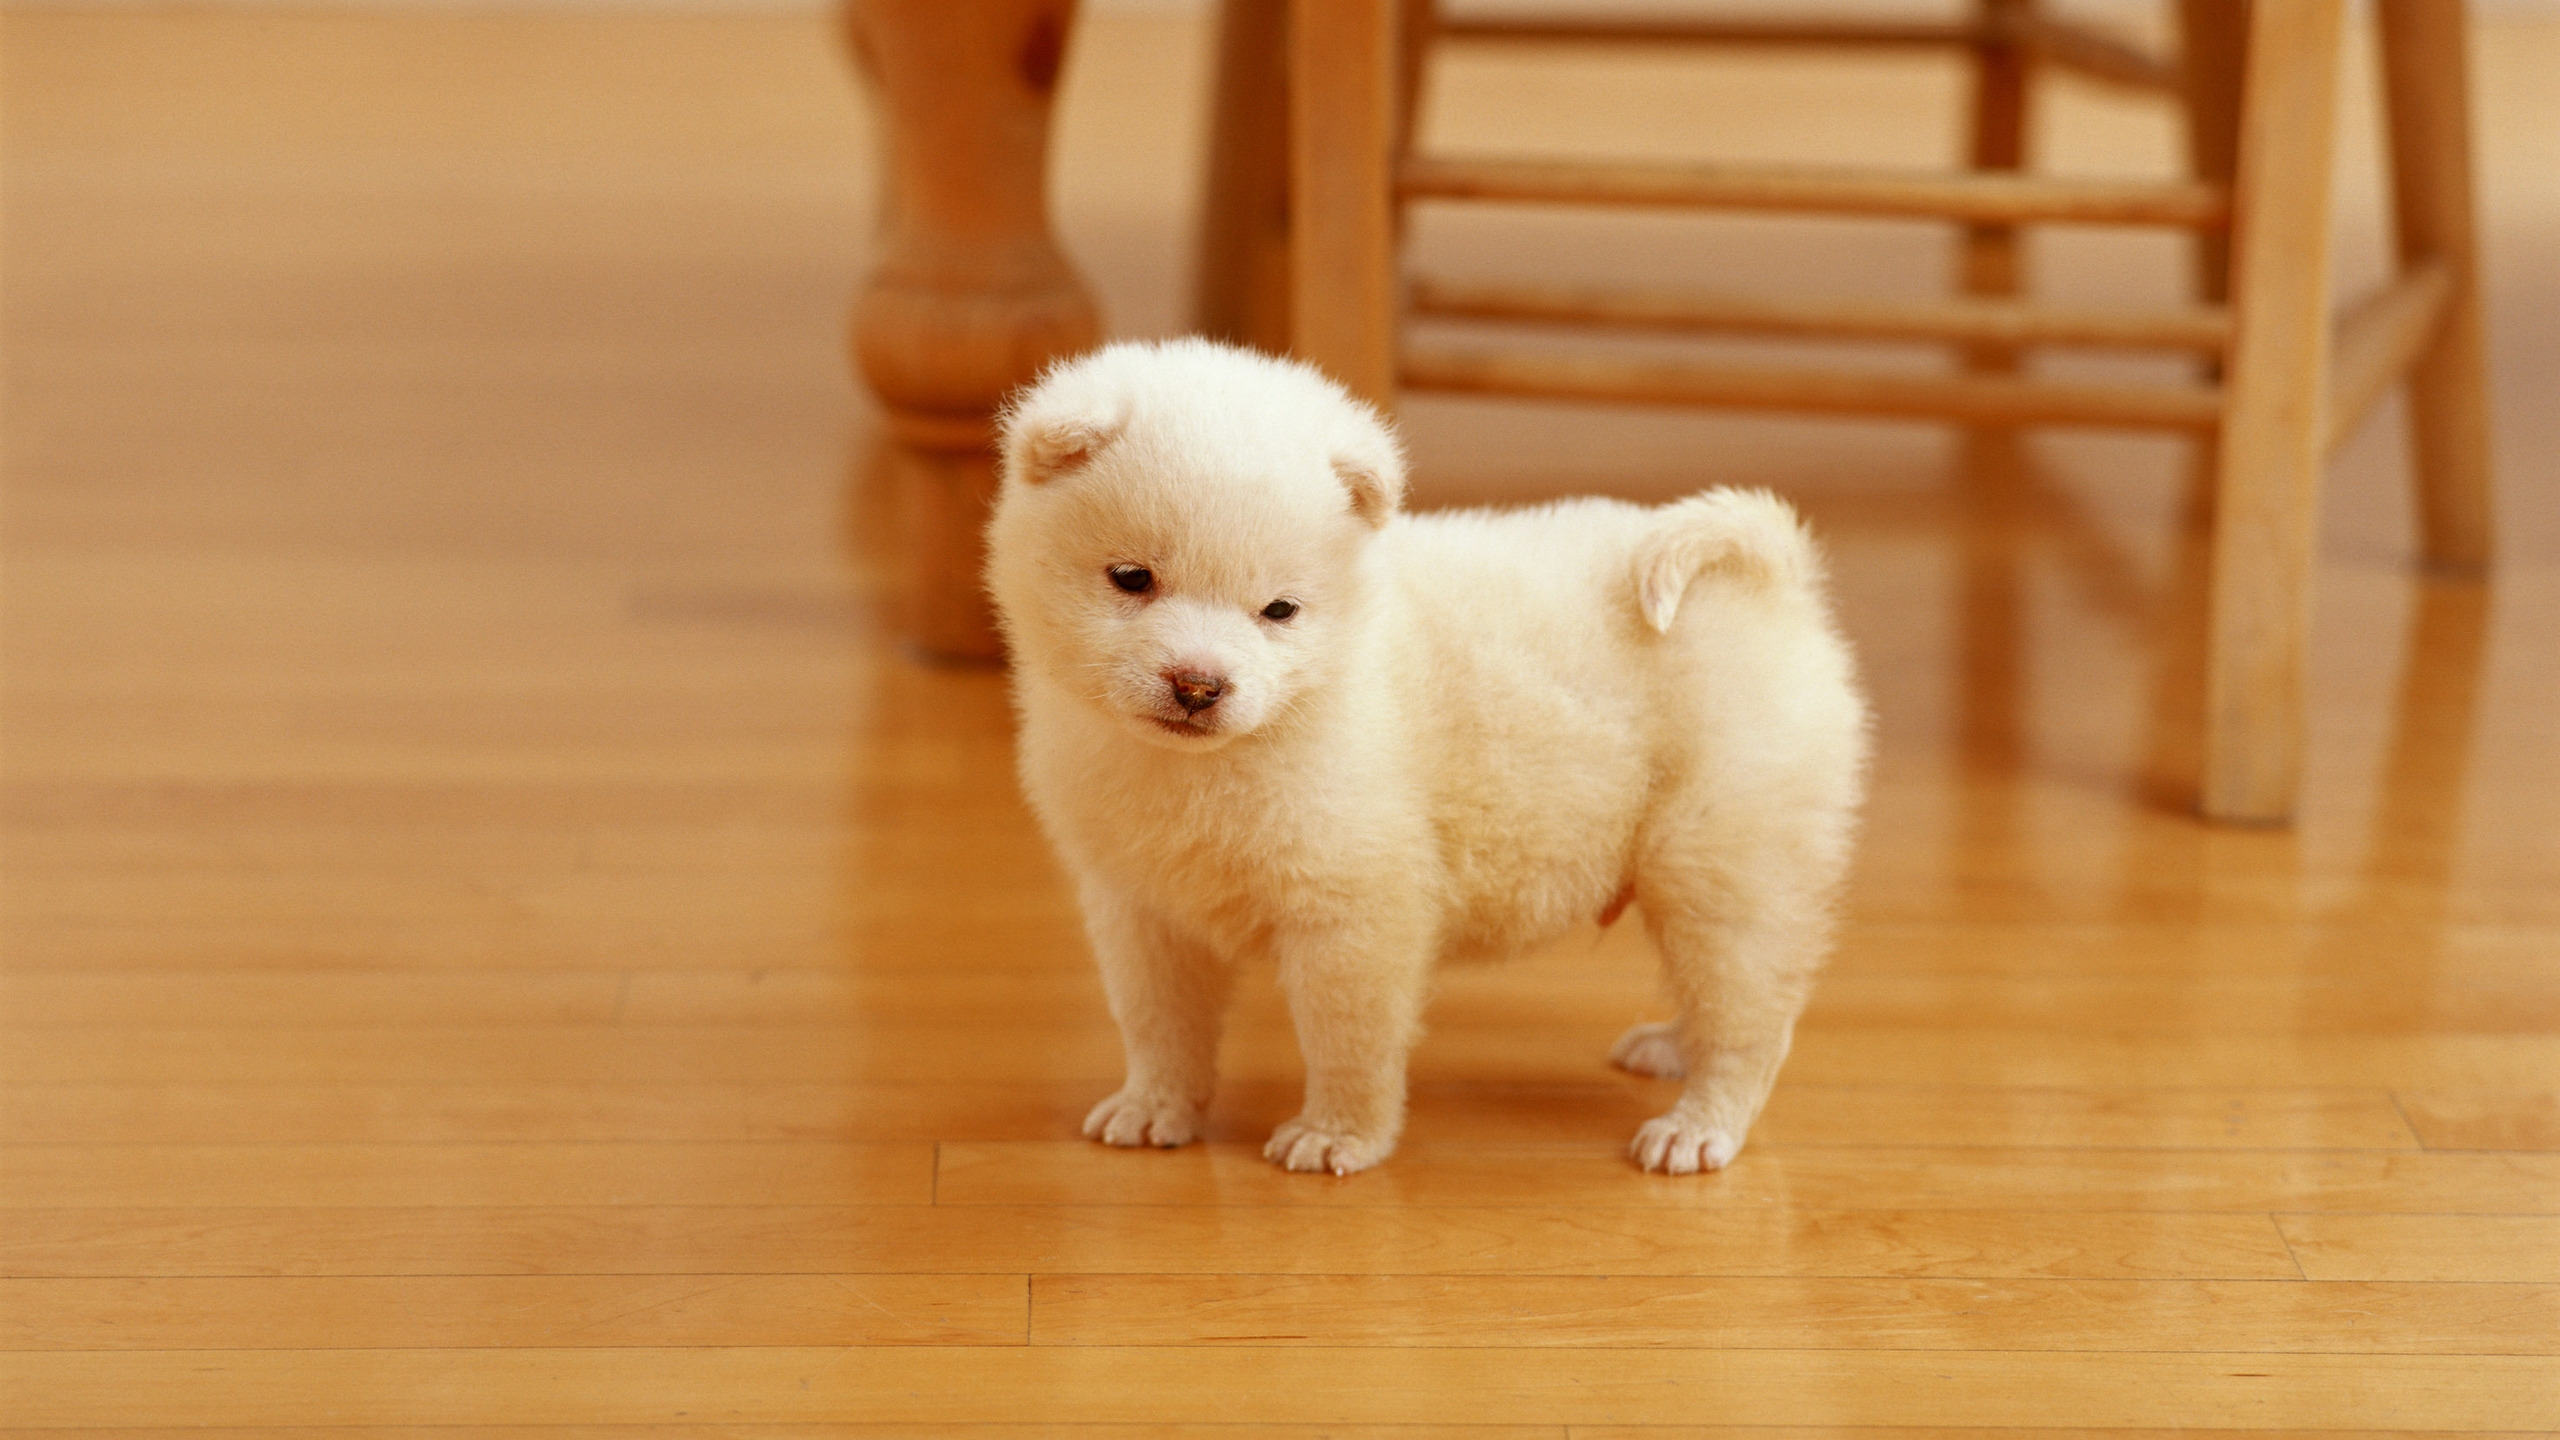 Lovely Puppy for 2560x1440 HDTV resolution